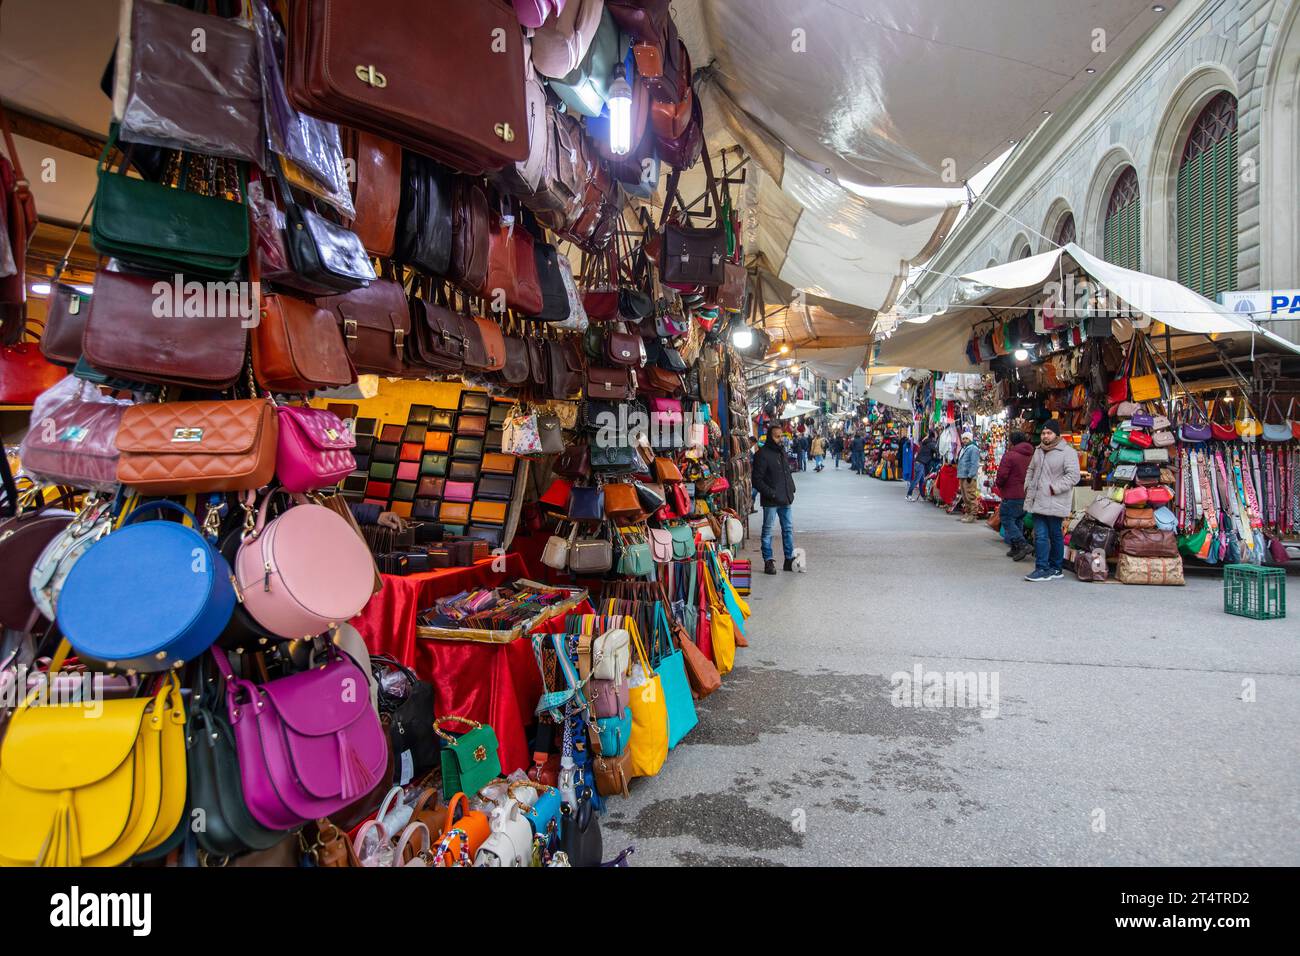 Leather goods are display for sale at the makeshift markets in Florence, italy Stock Photo